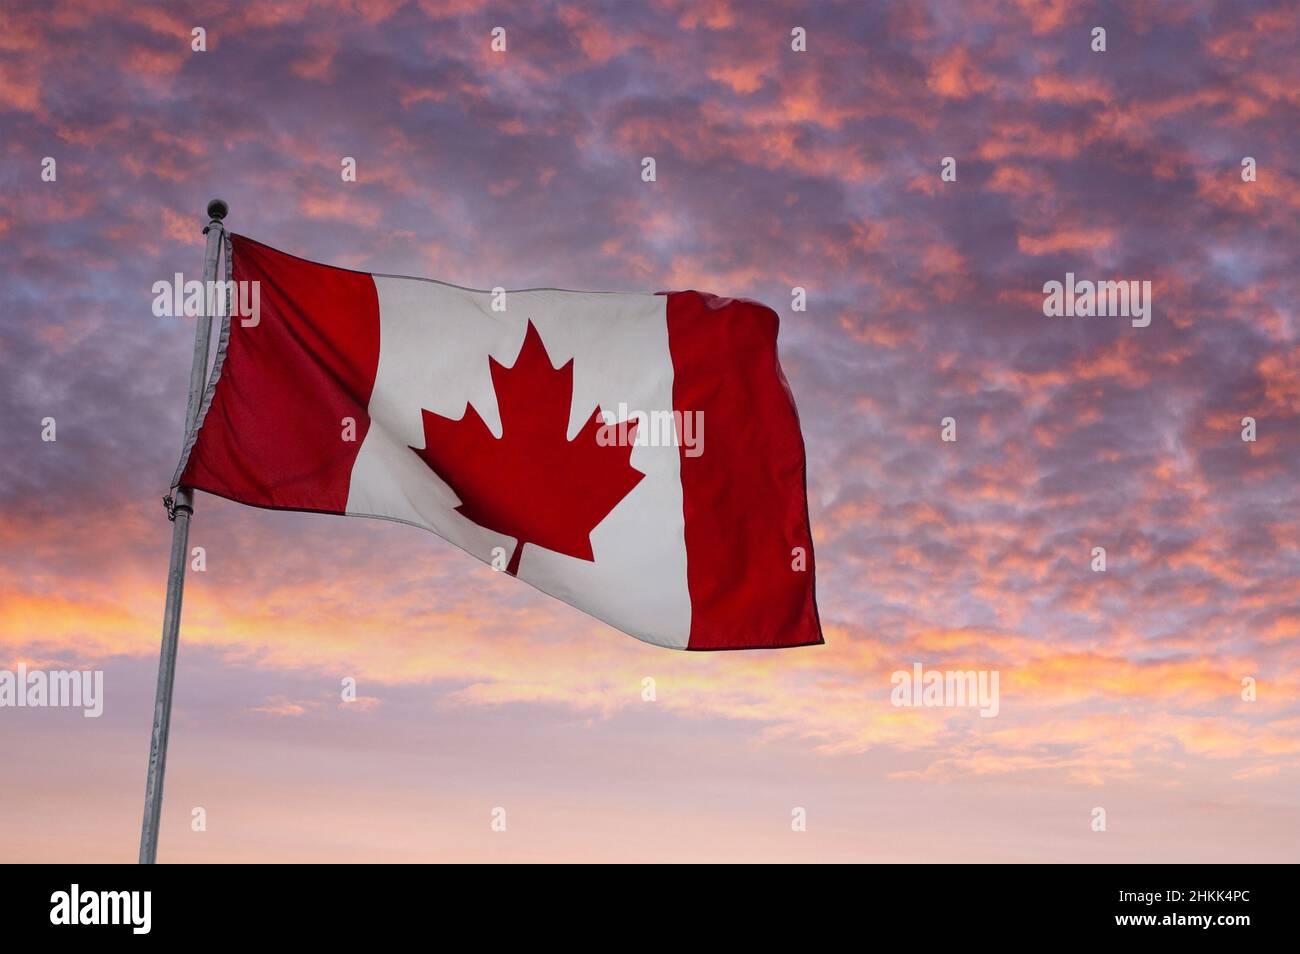 Flag of Canada flying on a pole against a sunrise background. Stock Photo